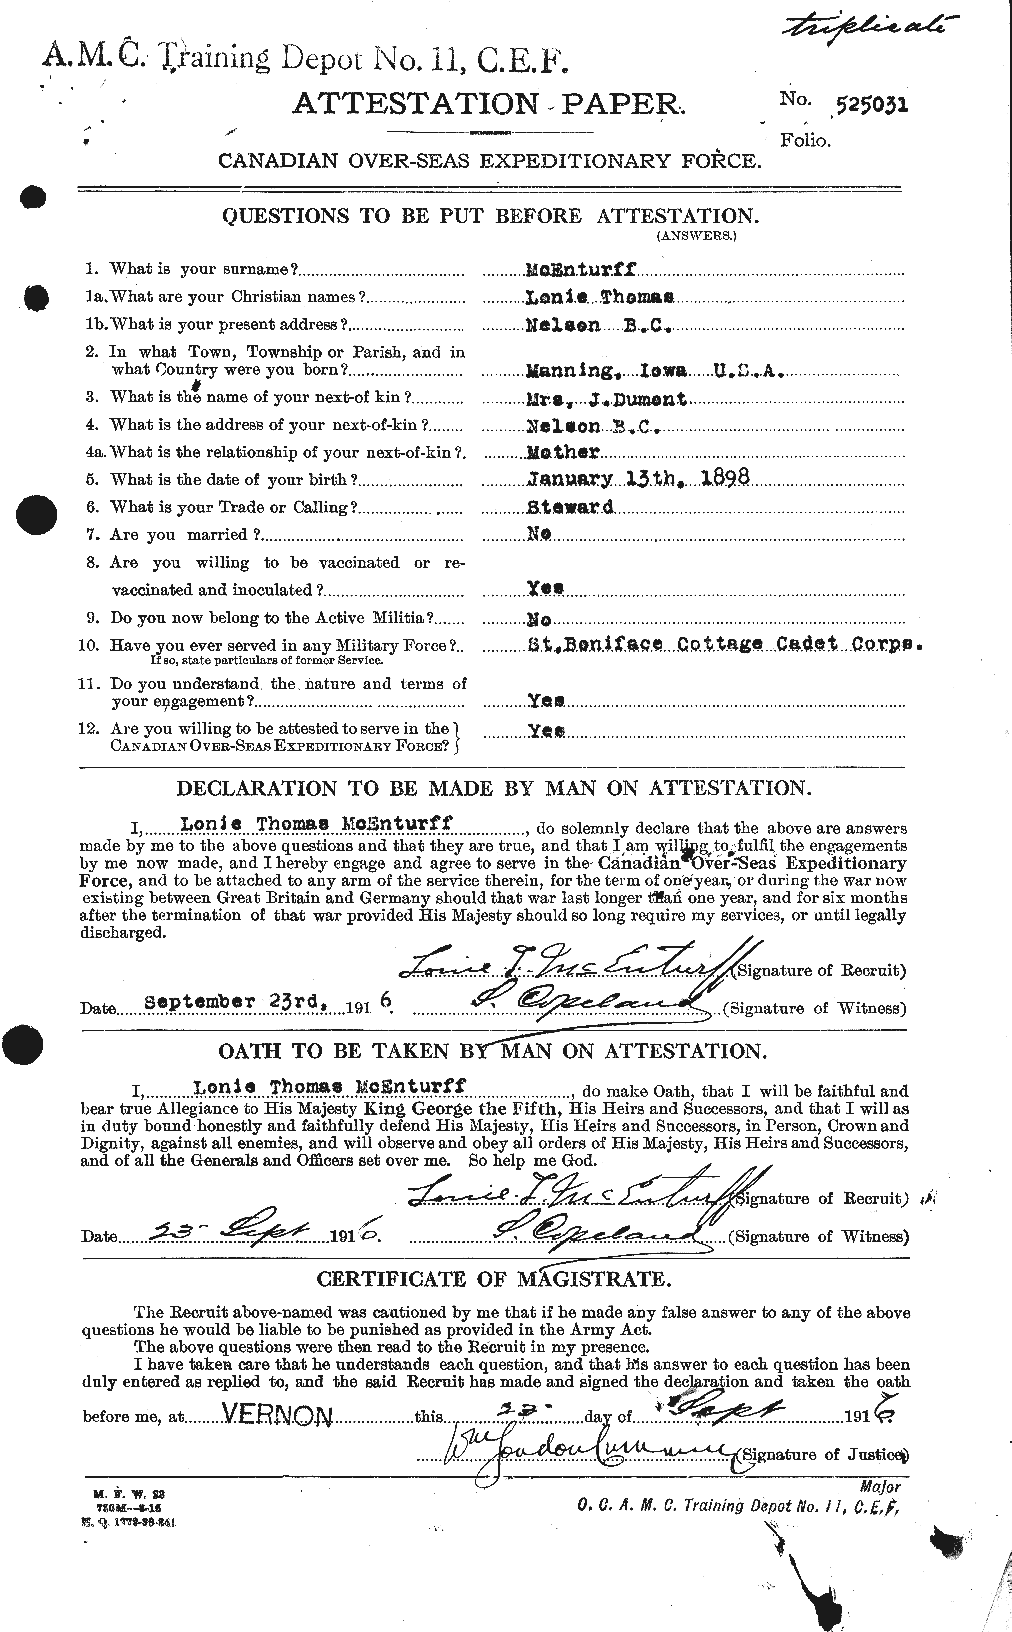 Personnel Records of the First World War - CEF 522152a